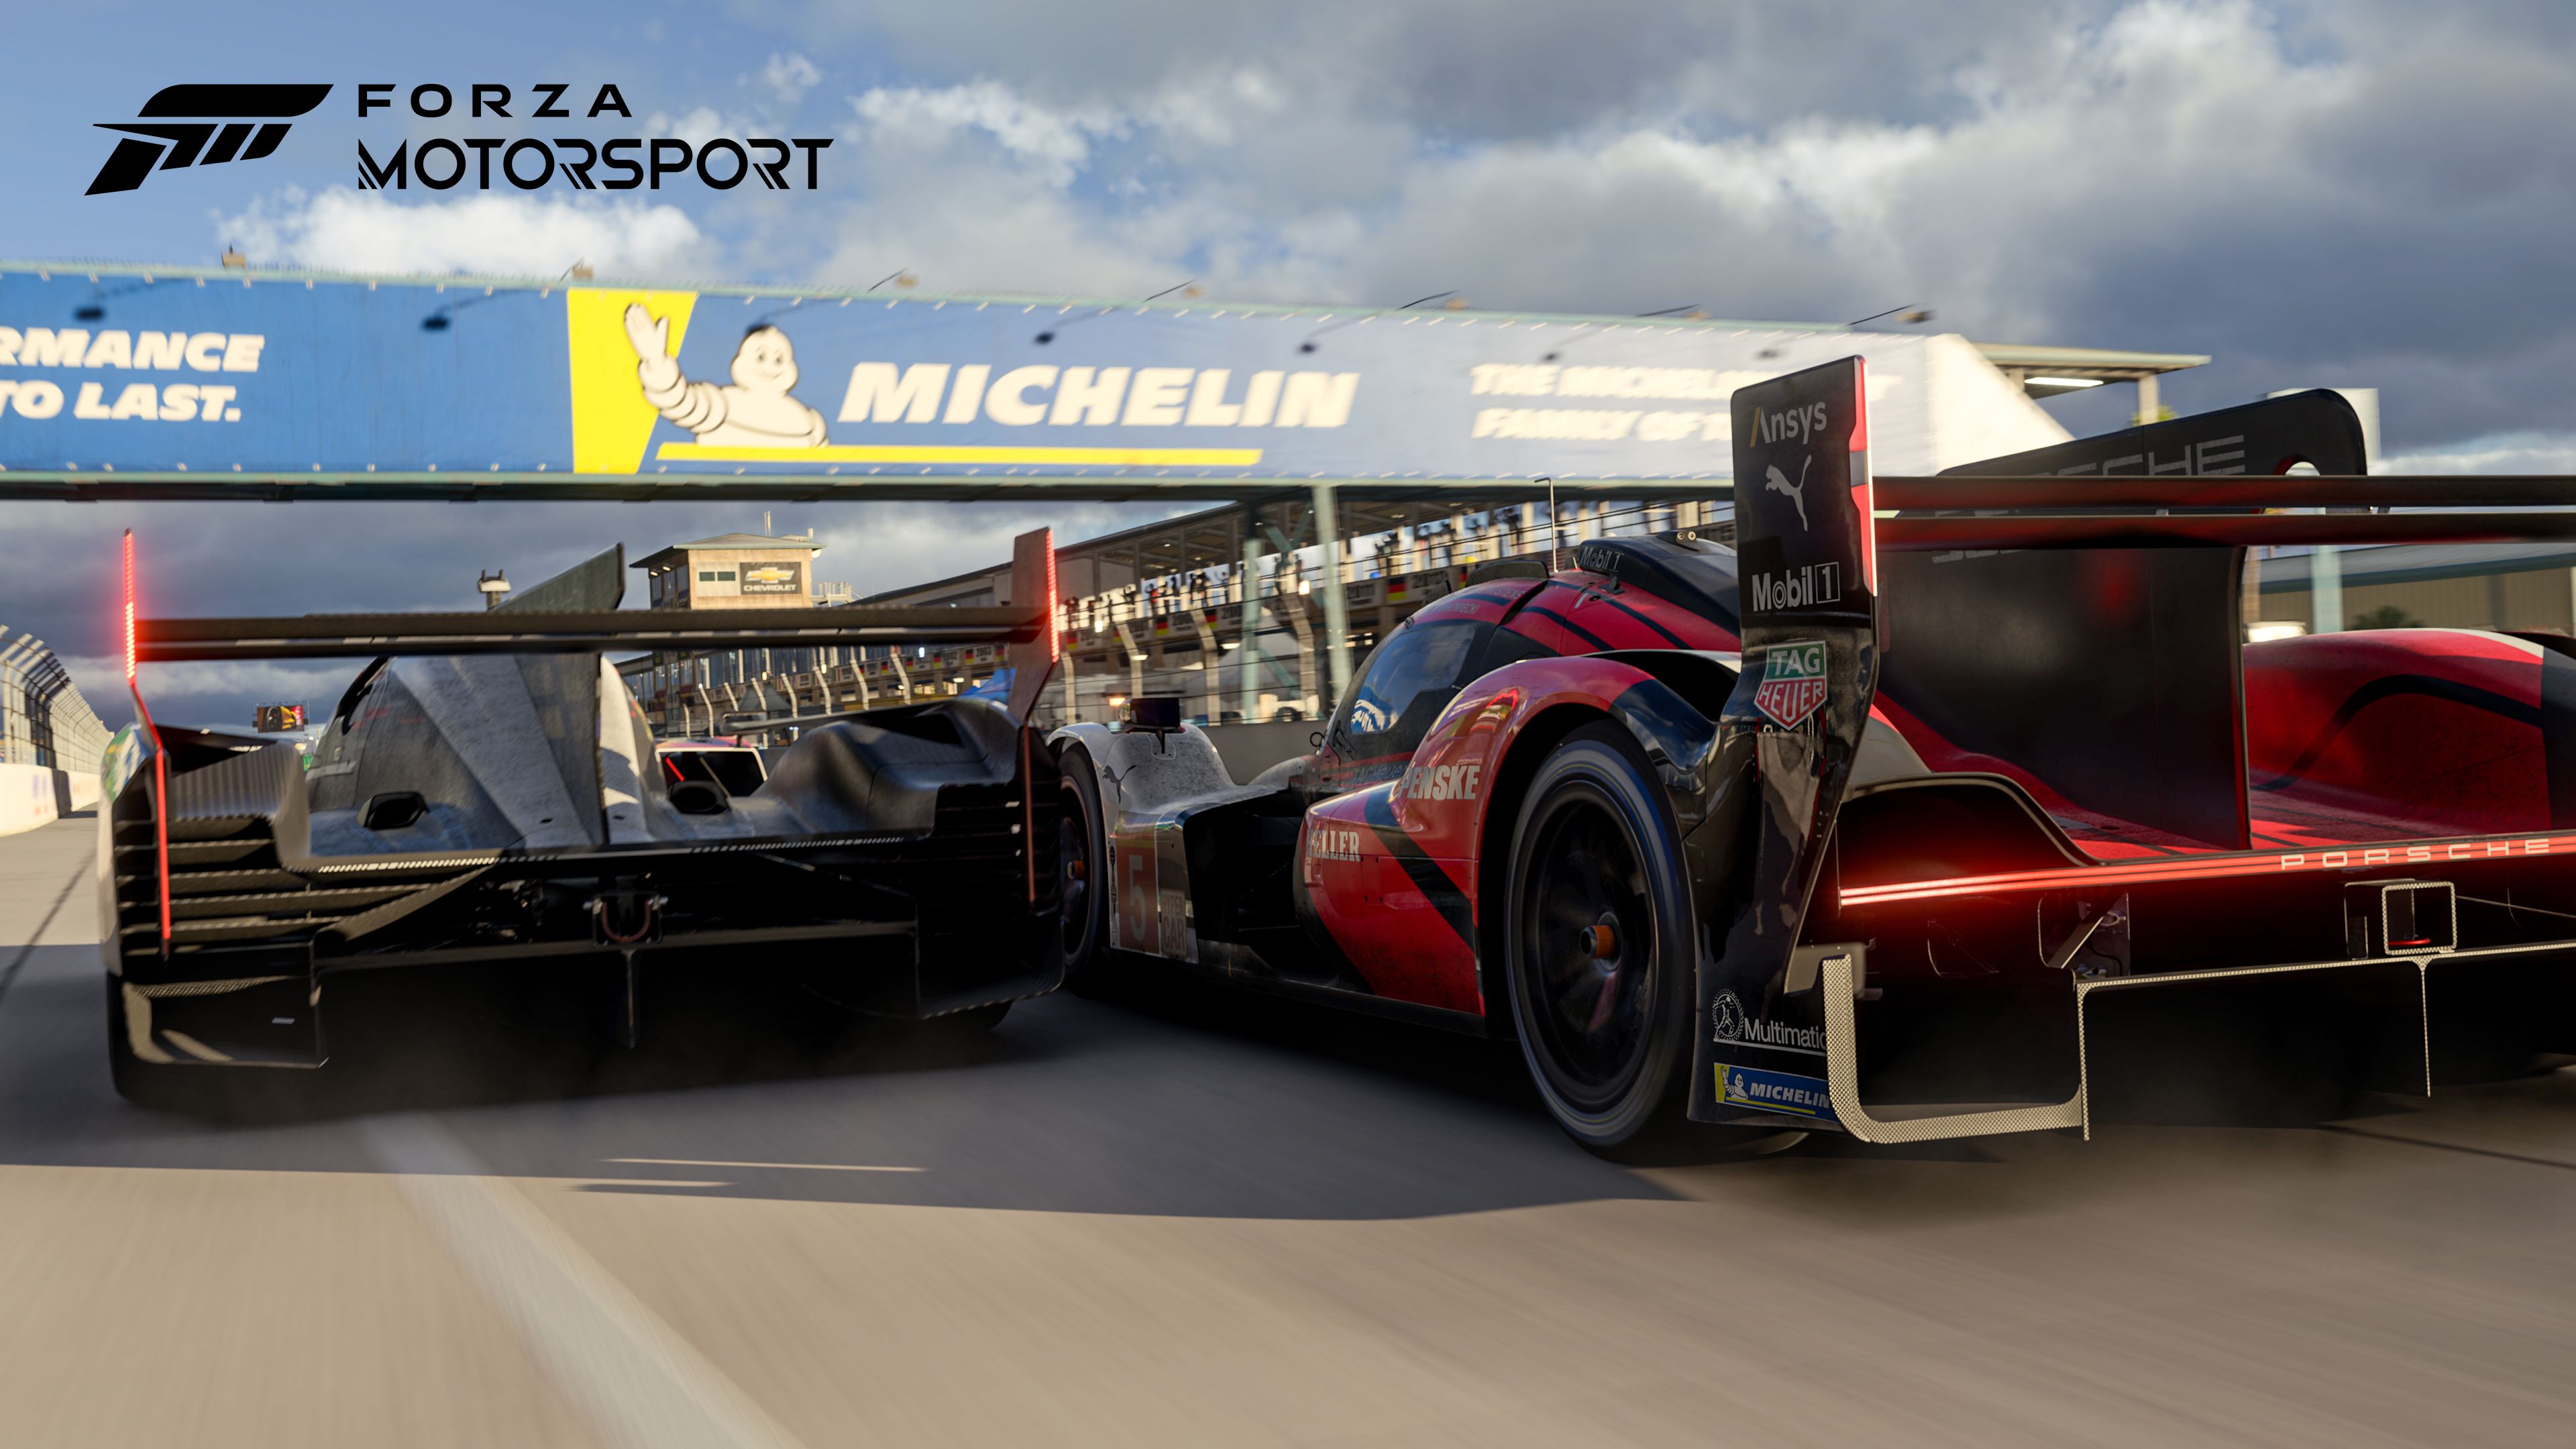 Forza Motorsport: Update 9 Brings Endurance Races, the Iconic Sebring Track, and More